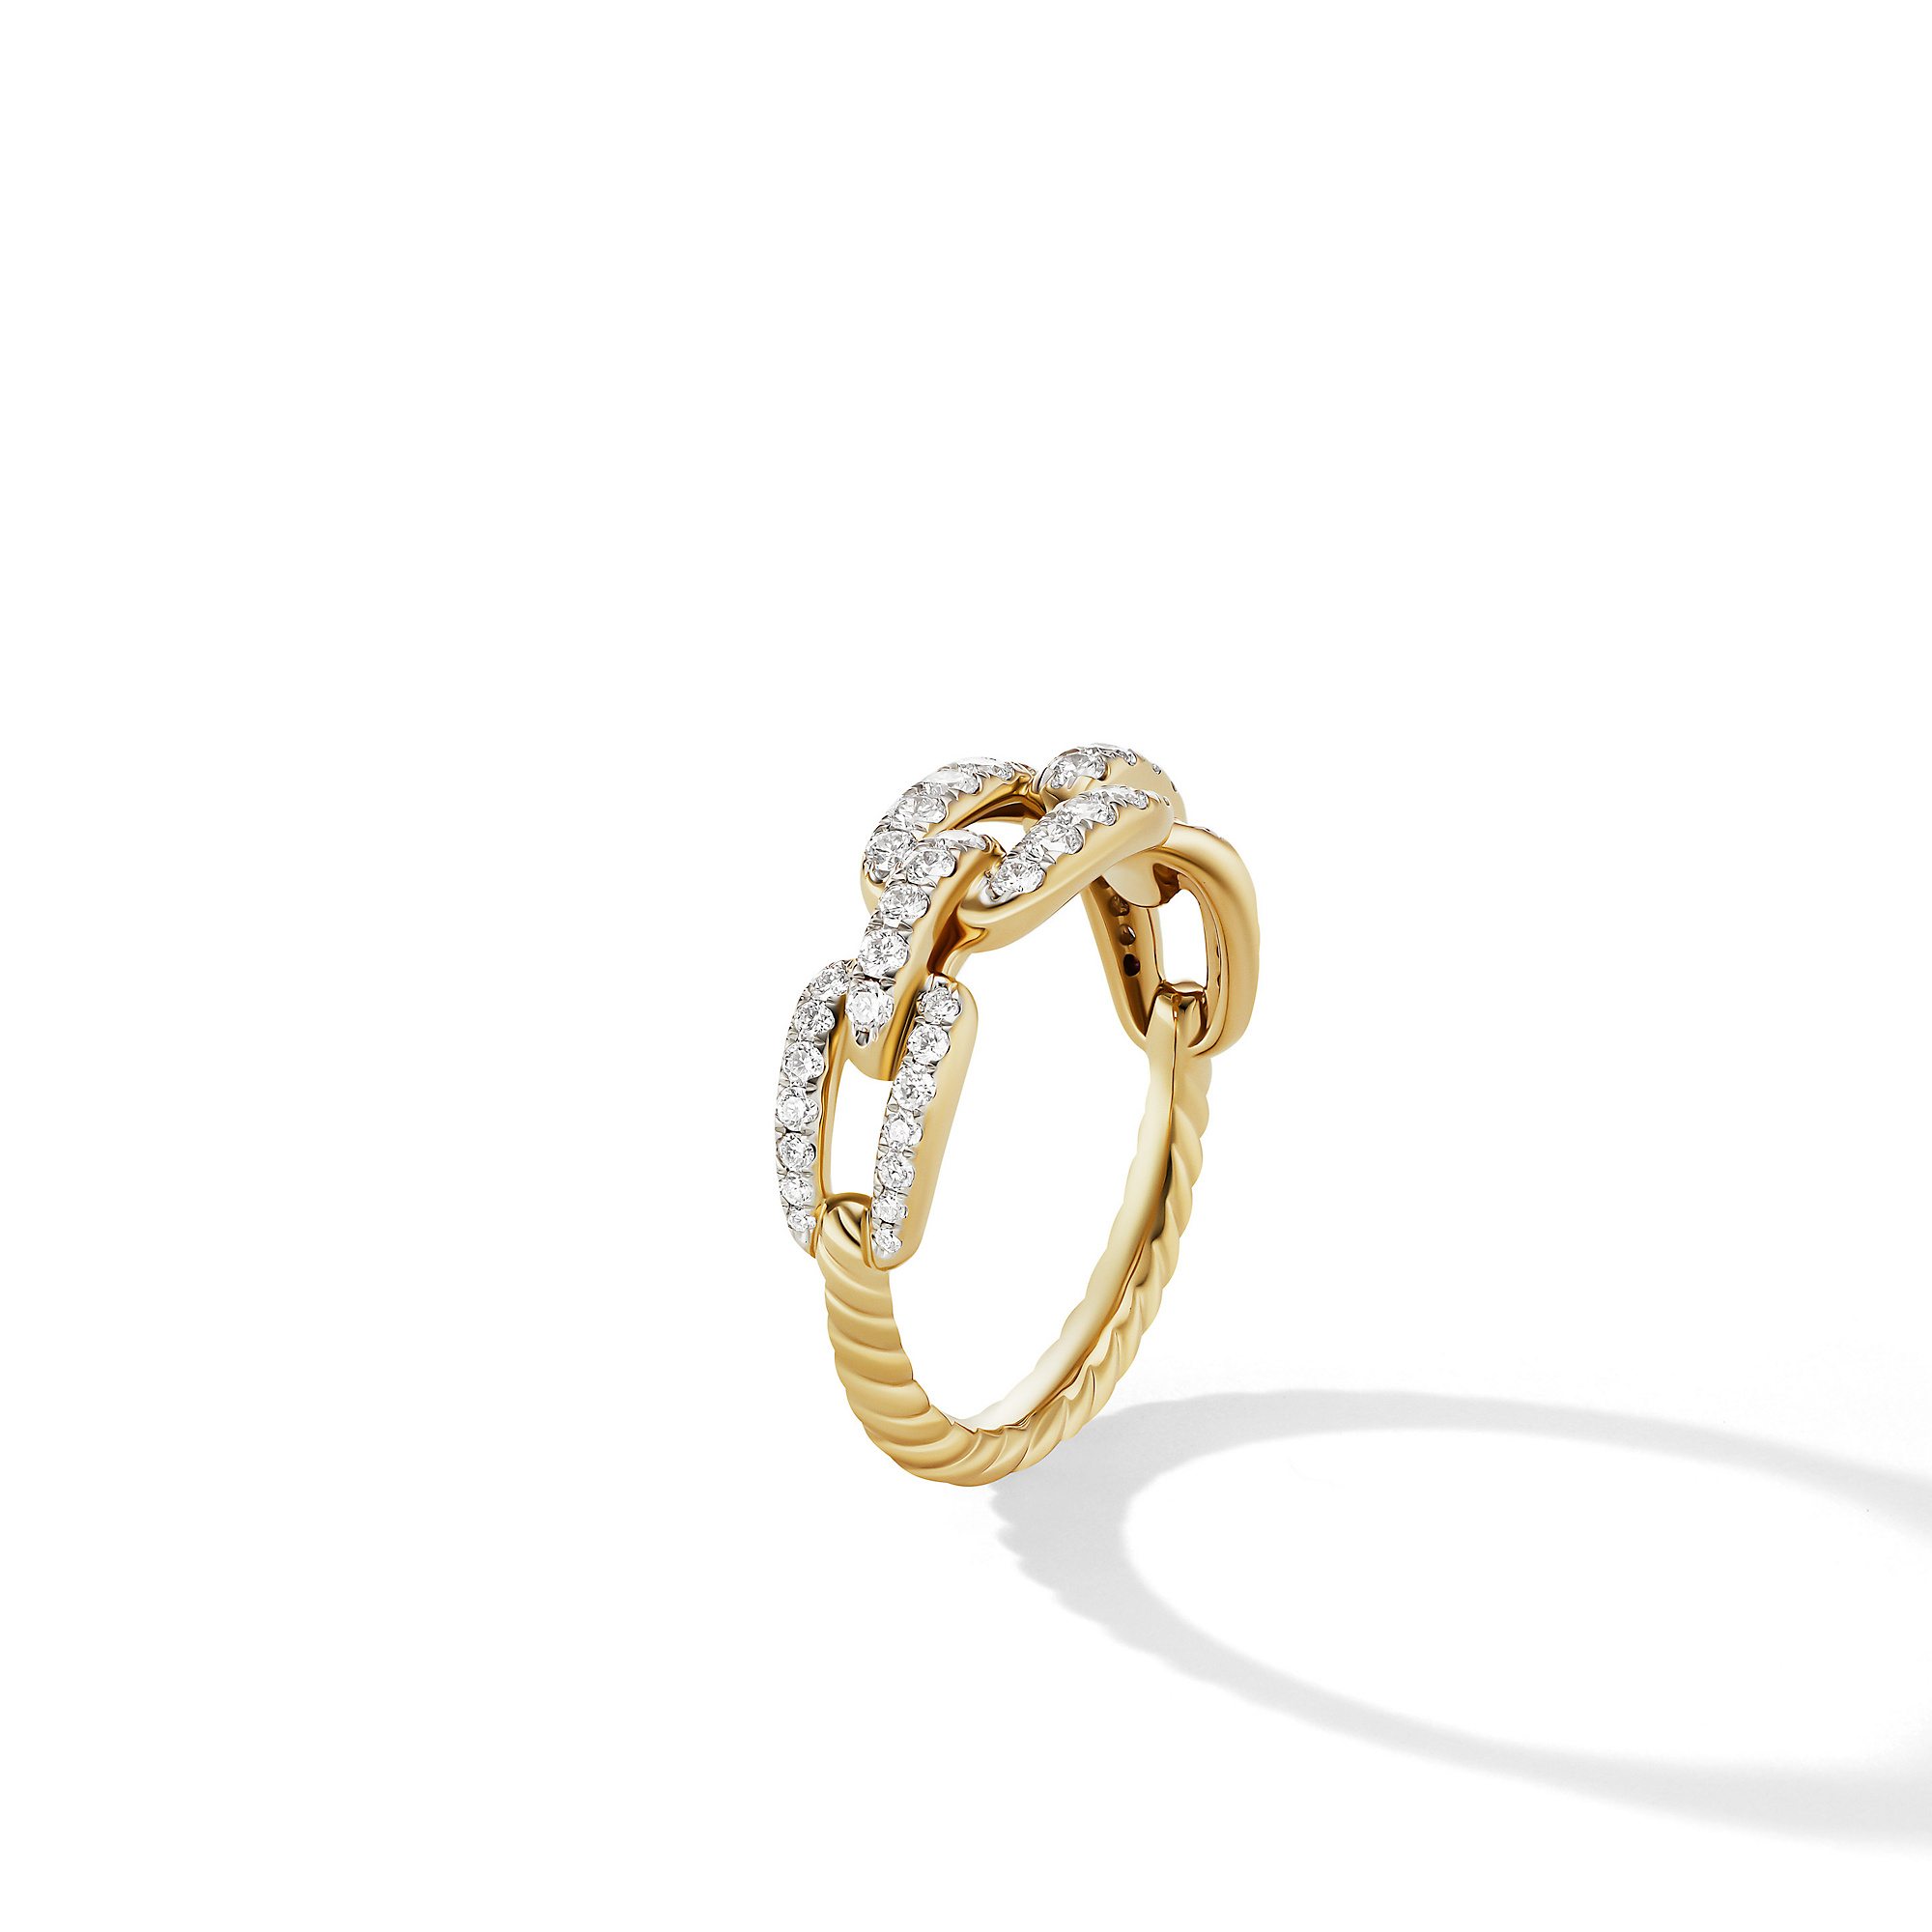 David Yurman Stax Chain Link Ring in 18K Yellow Gold with Pave Diamonds and Emerald 3